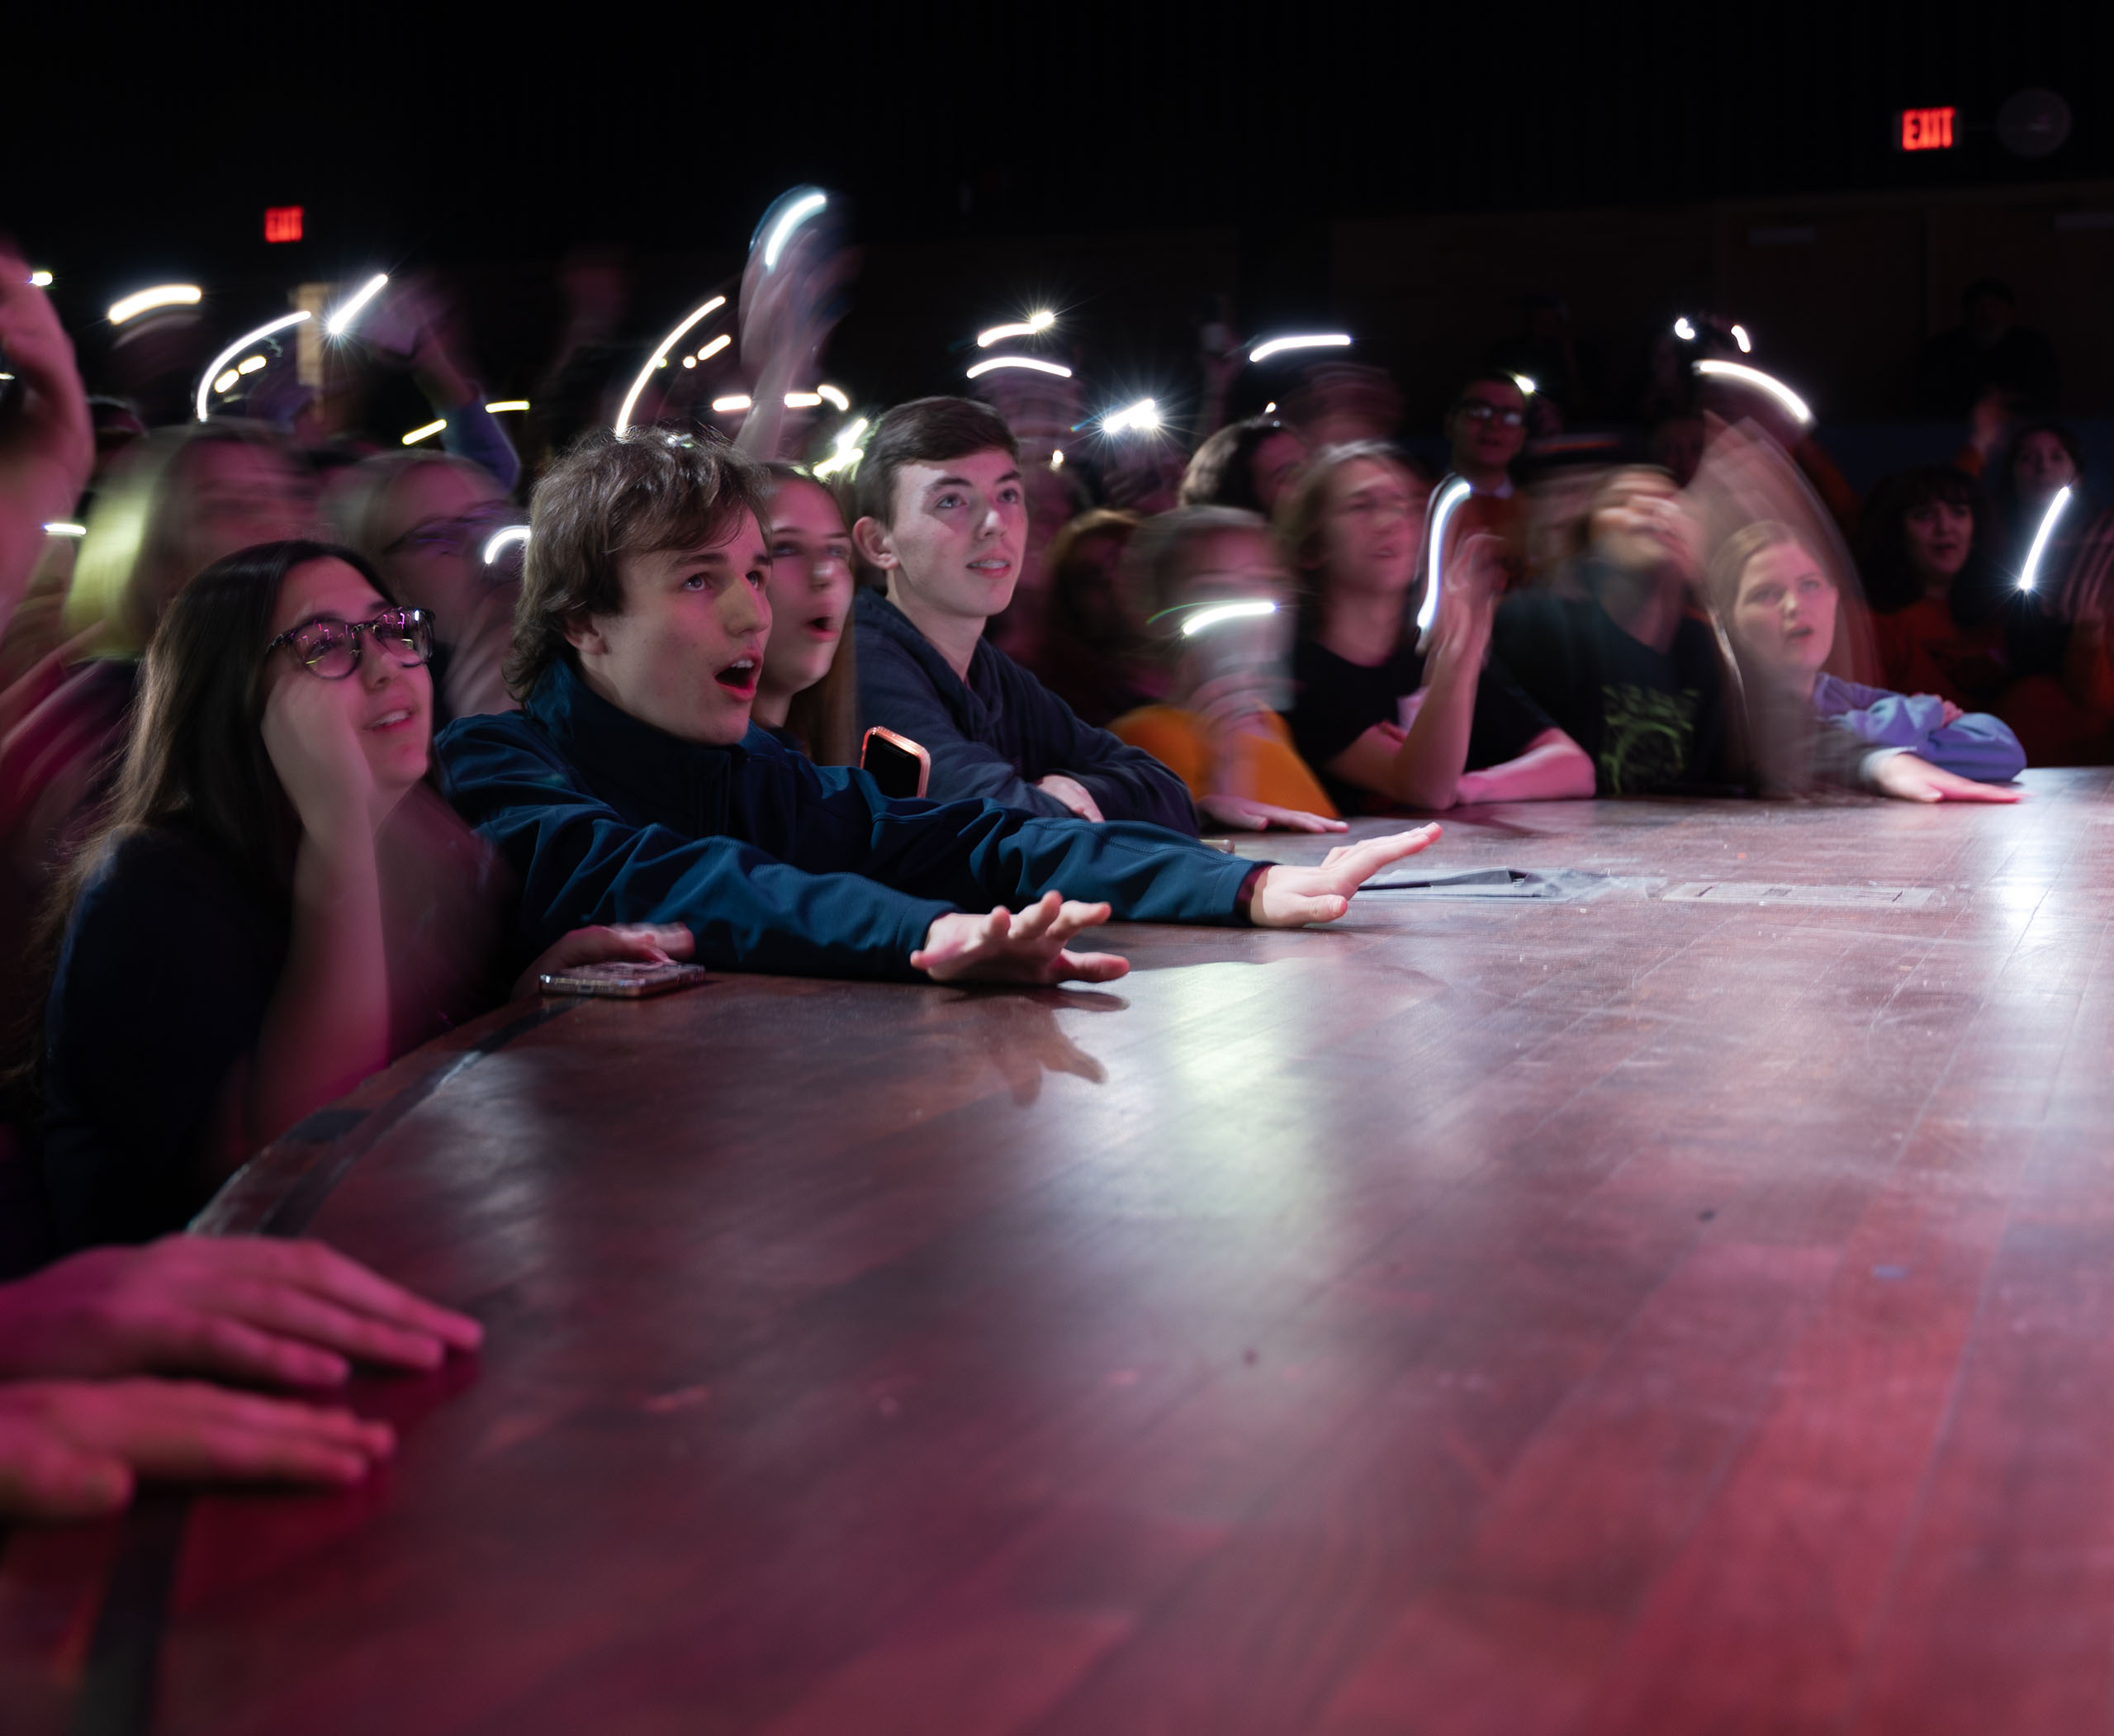 A group of students standing in the orchestra pit at the edge of a thrust stage. The students are waving phone flashlights and reaching onto the stage towards the performers.